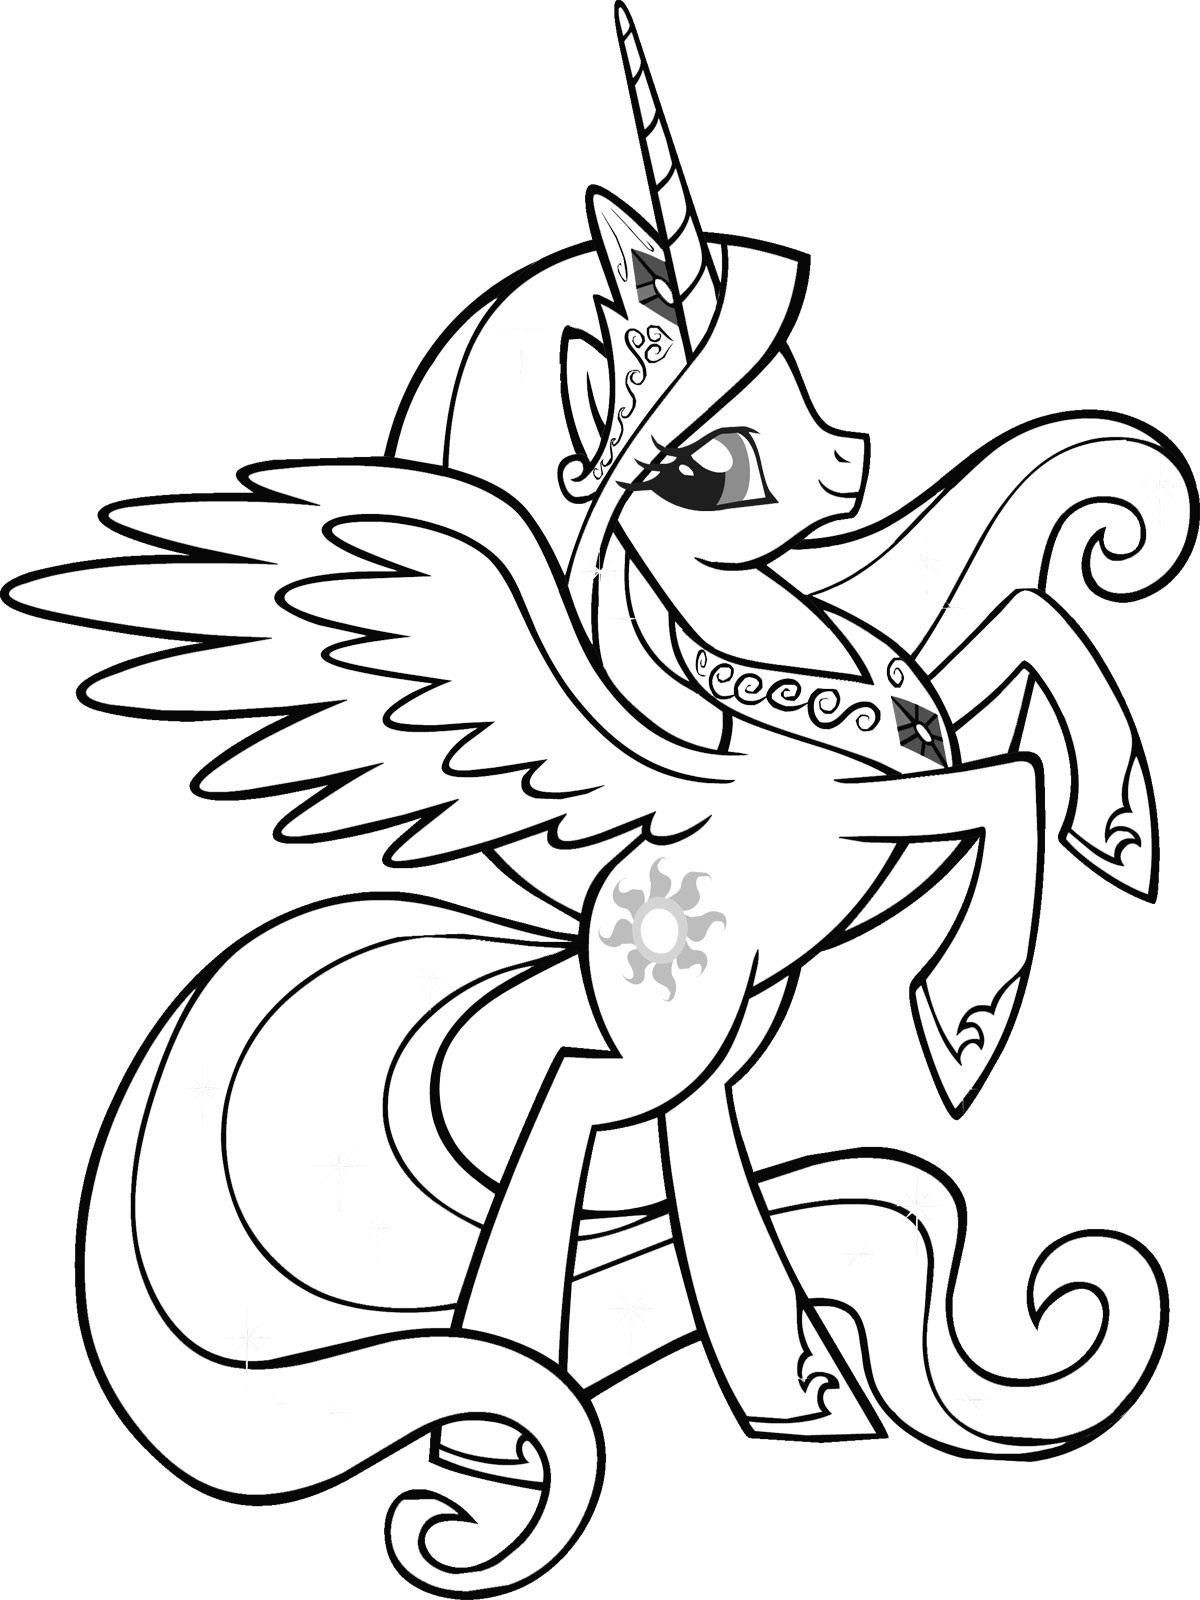 Unicorn Coloring Pages For Girls
 Unicorn Coloring Pages For M Pinterest